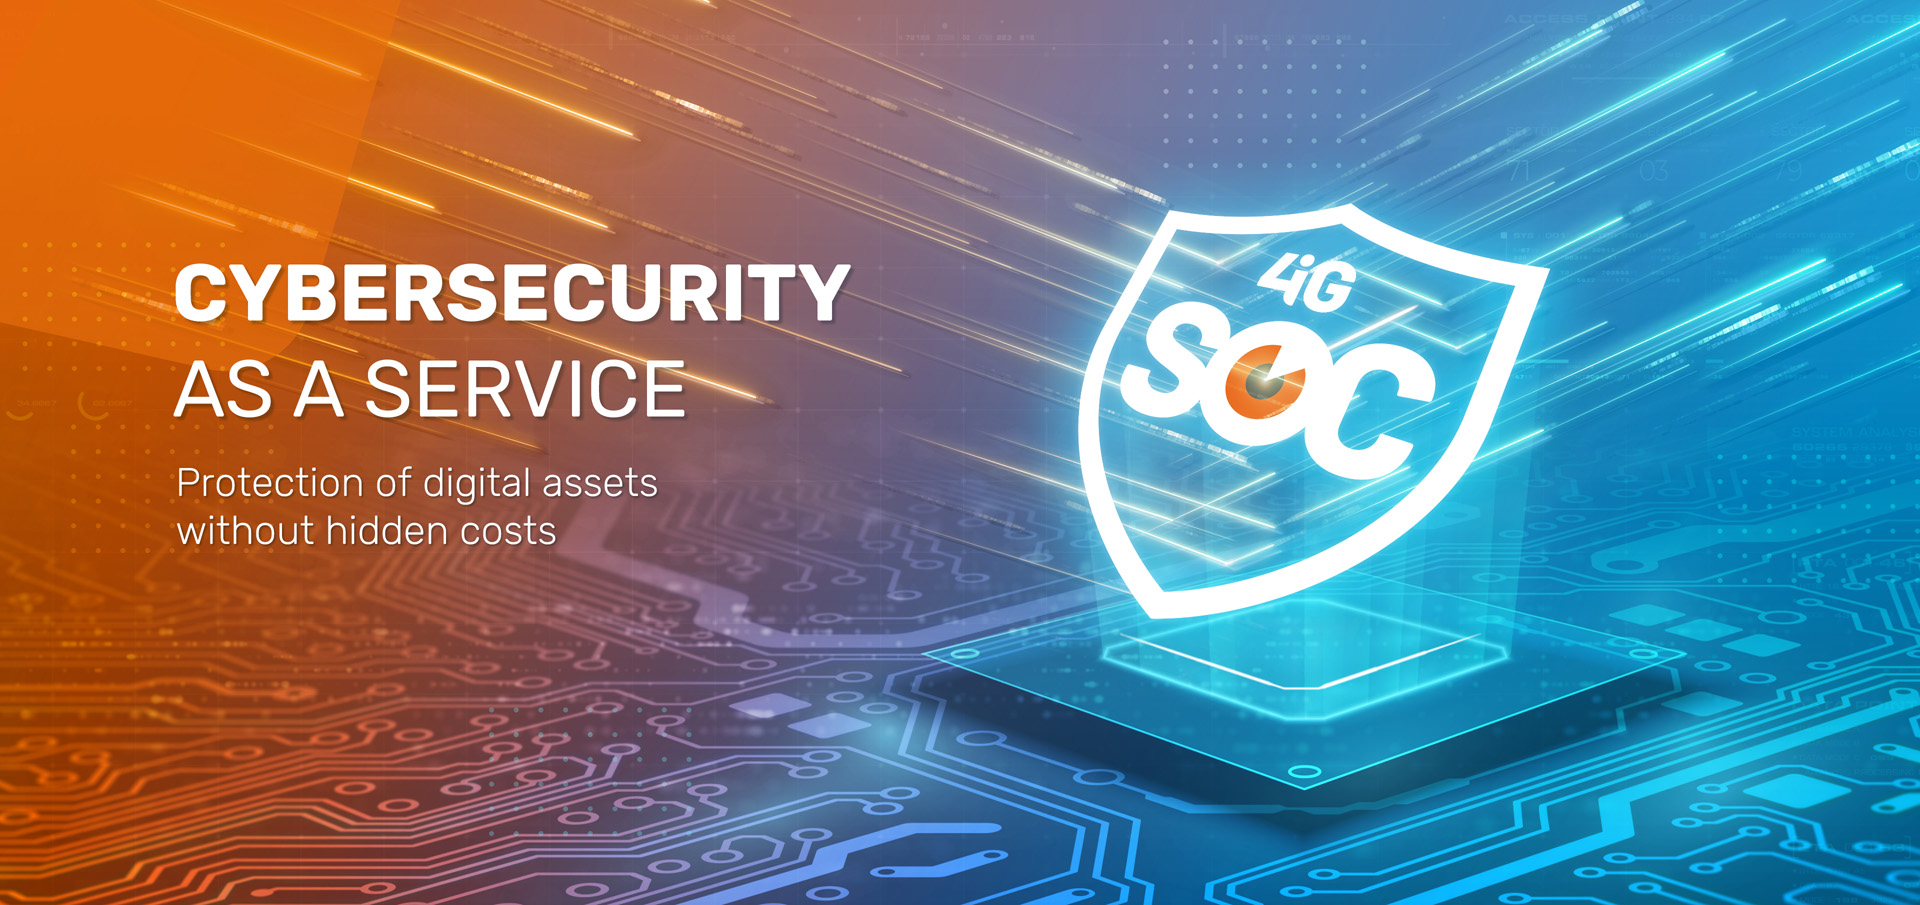 4iG Cybersecurity as a service